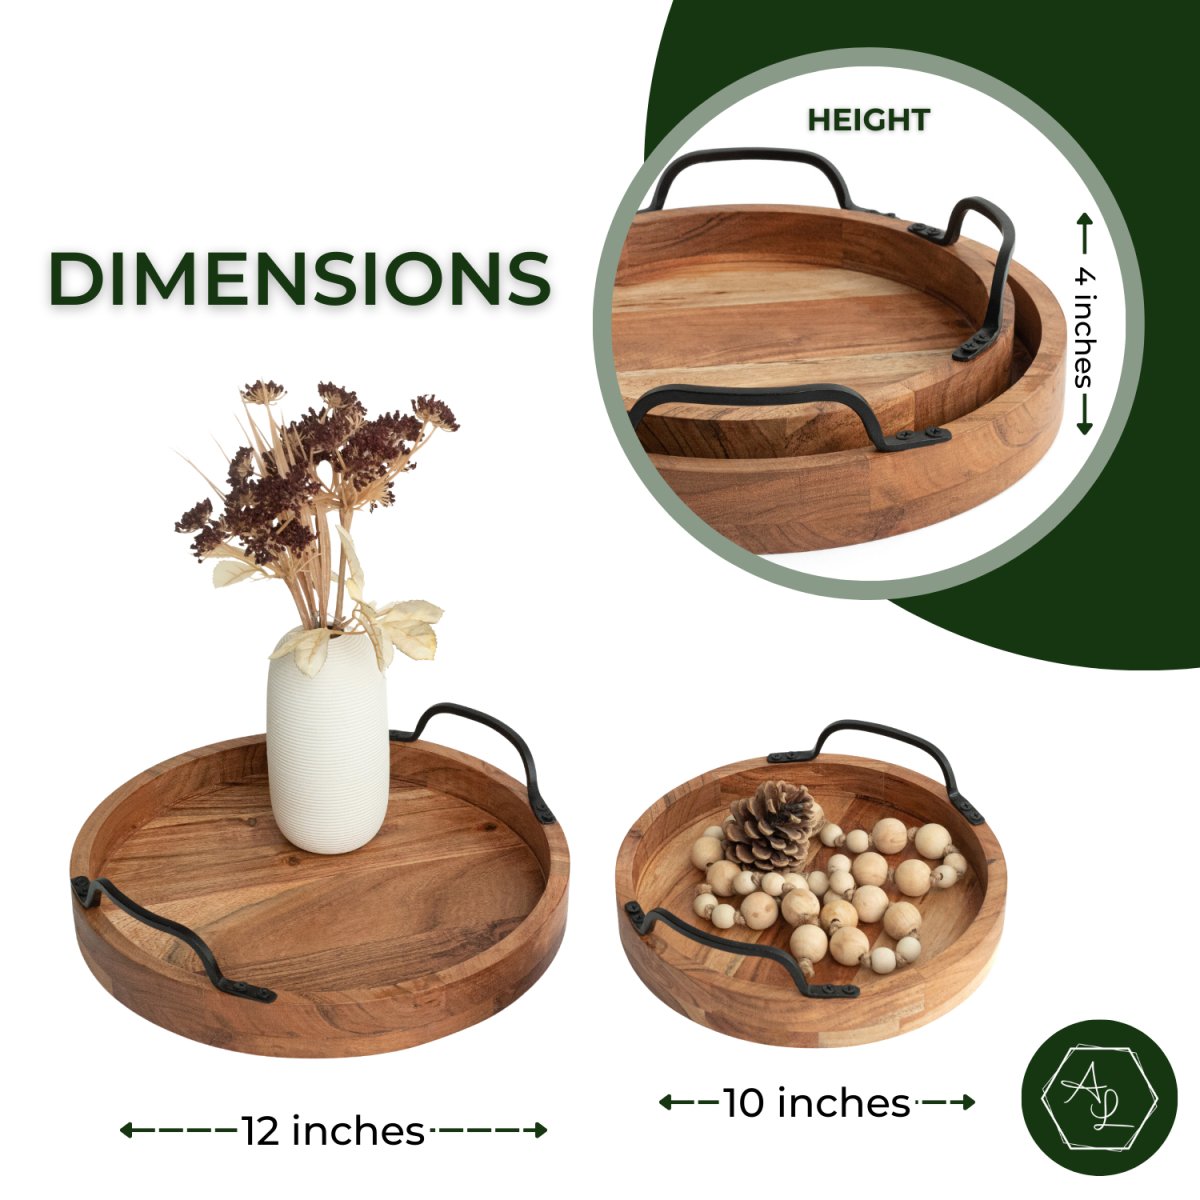 Round Wooden Serving Trays with Black Metal Handles, set of 2 dimensions image- Aesthetic Living